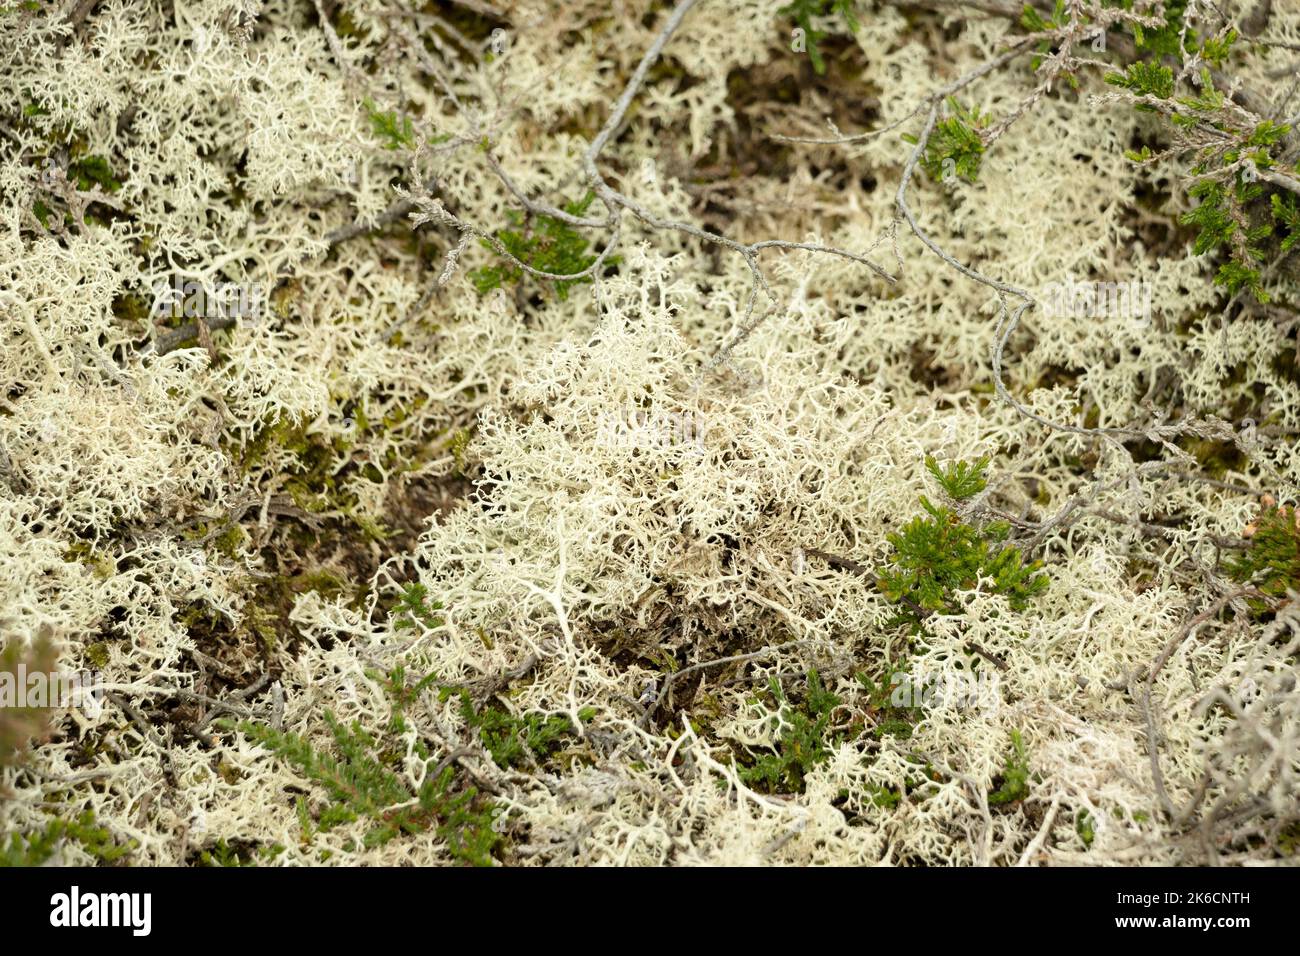 A miniature microcosm of lichens and mosses grow in between patches of Heather on Powys Mountain. They are predominantly Usnea and Cladonia species Stock Photo